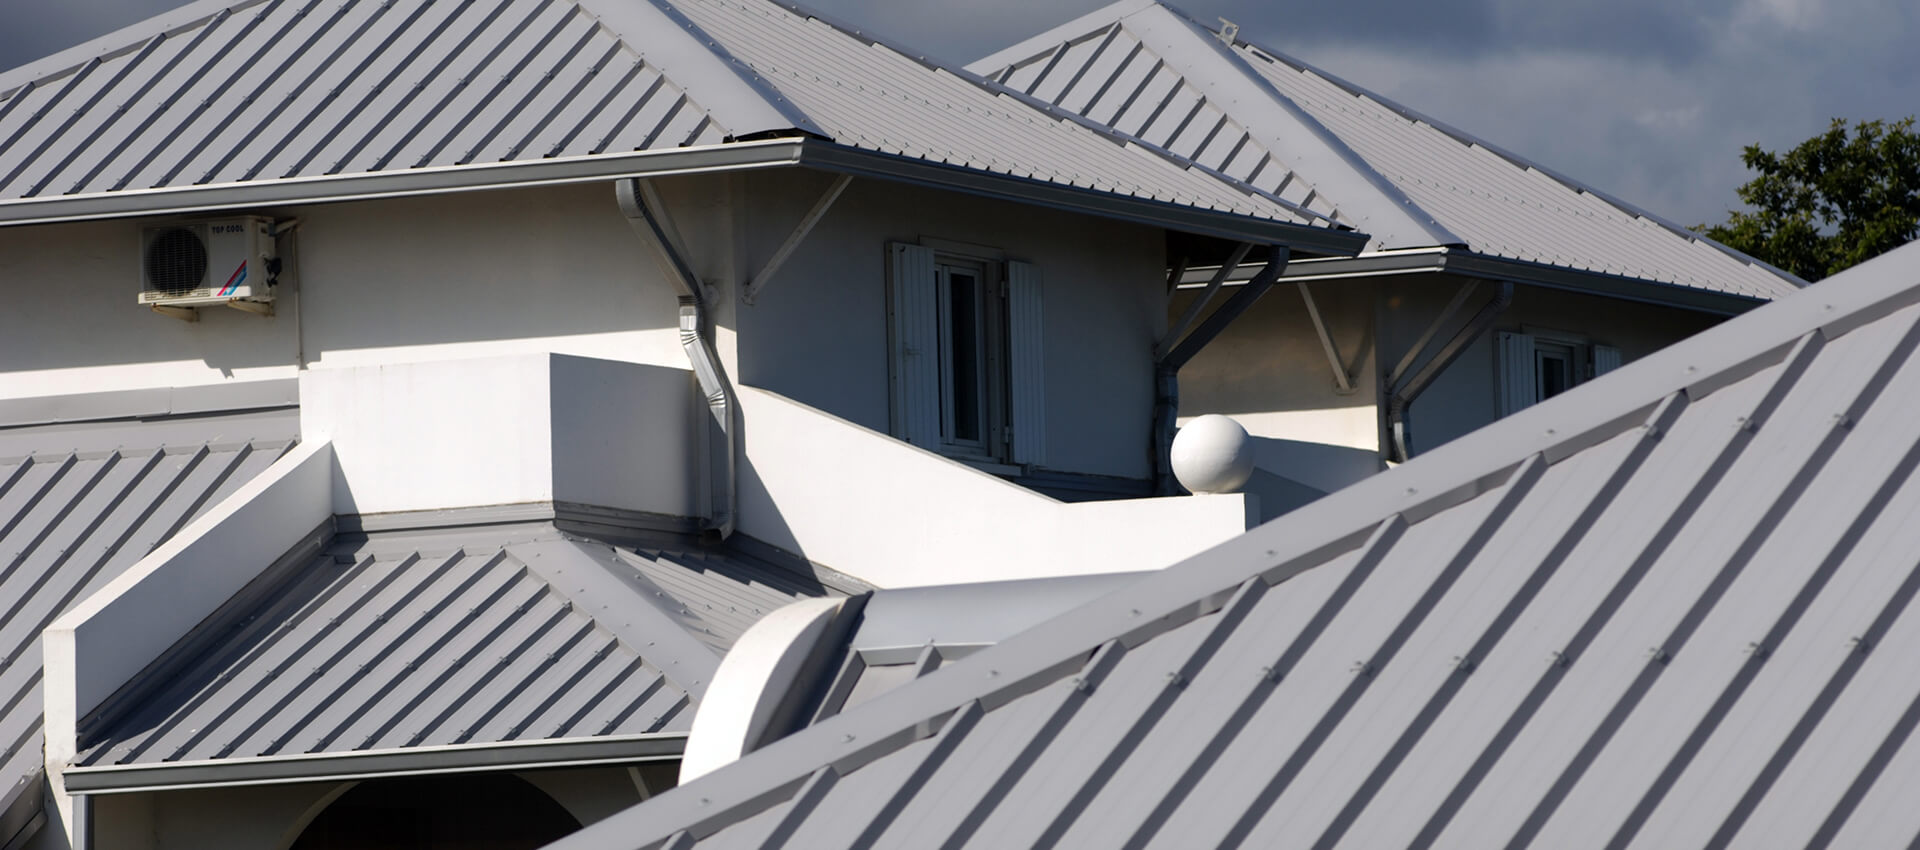 %Roofs and Gutters